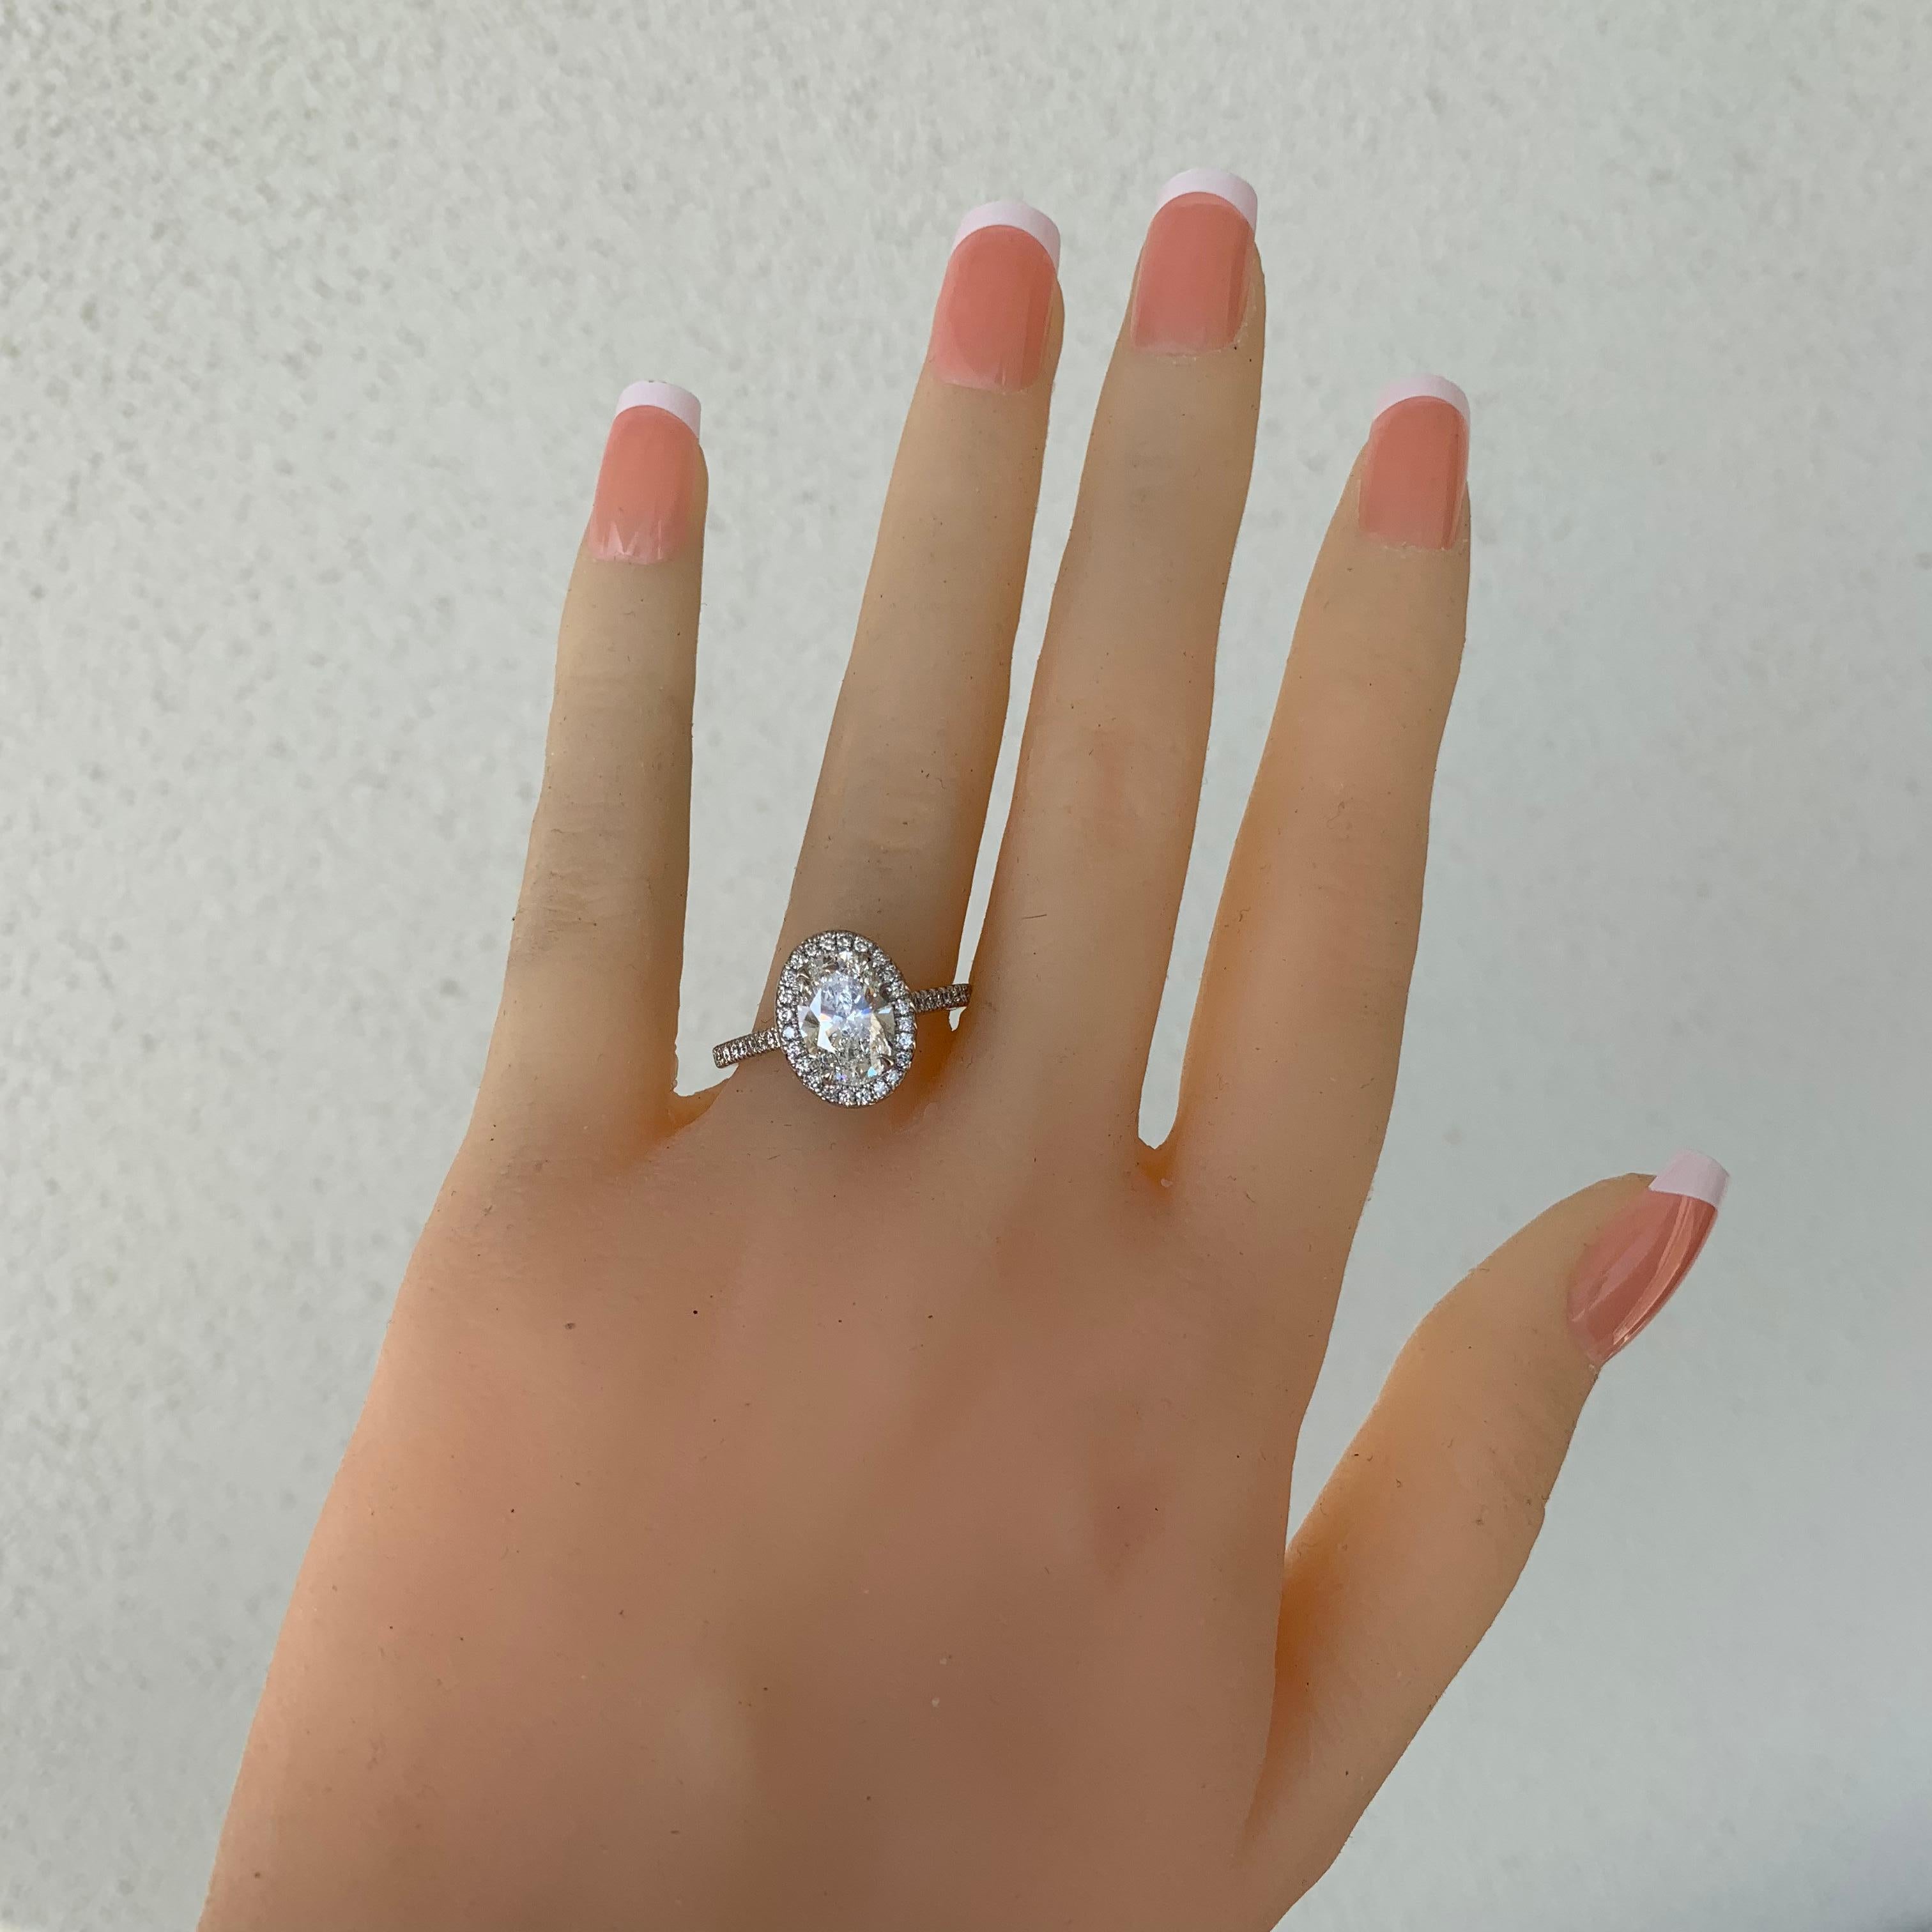 AS070-1300064

Ring will be made to order and can be purchased without the center stone. I can supply a different center stone to fit your budget if it is higher or lower. Will take approximately 1-2 business weeks from the date you approve the